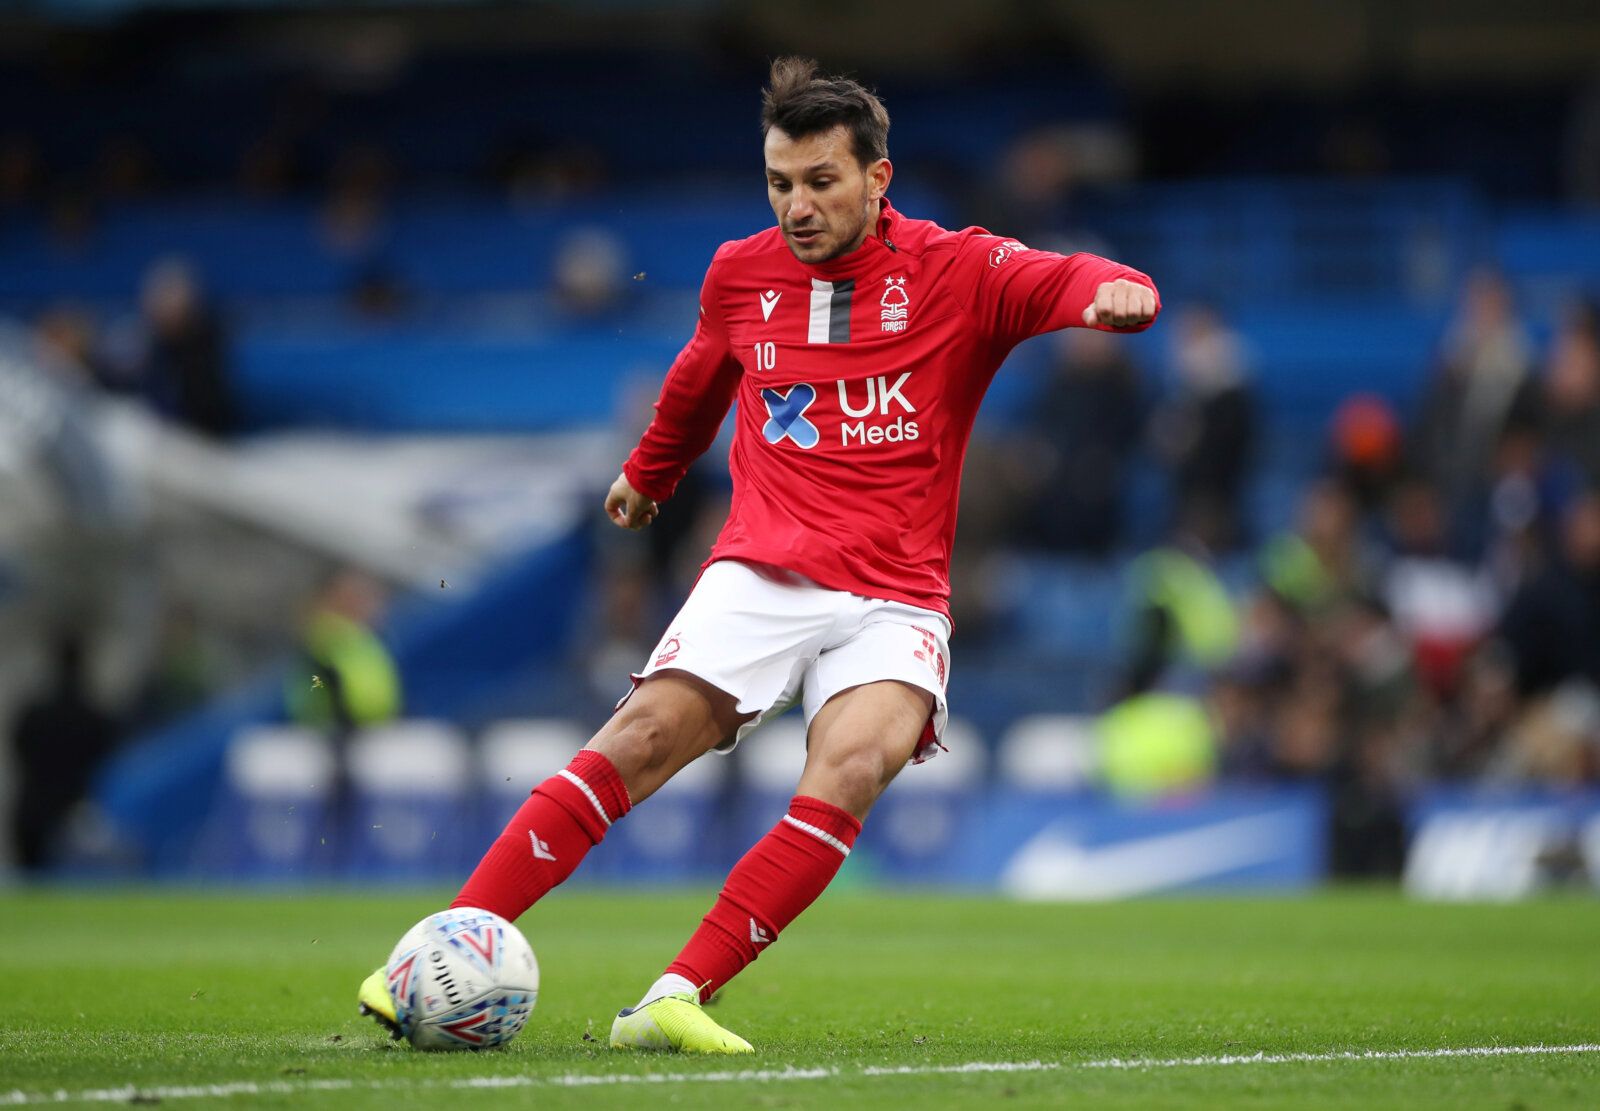 Soccer Football - FA Cup - Third Round - Chelsea v Nottingham Forest - Stamford Bridge, London, Britain - January 5, 2020  Nottingham Forest's Joao Carvalho during the warm up before the match    REUTERS/David Klein